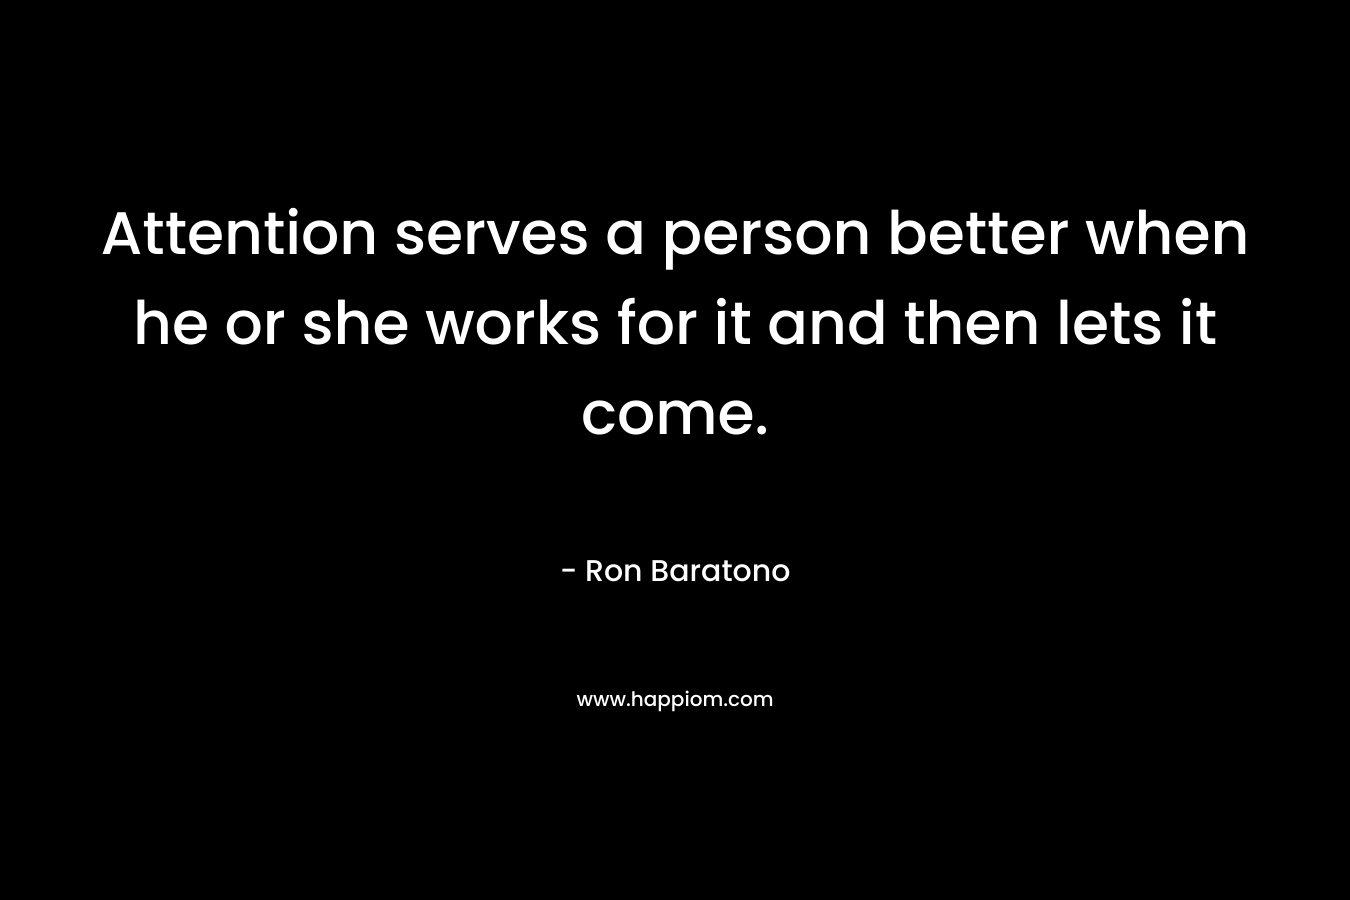 Attention serves a person better when he or she works for it and then lets it come.